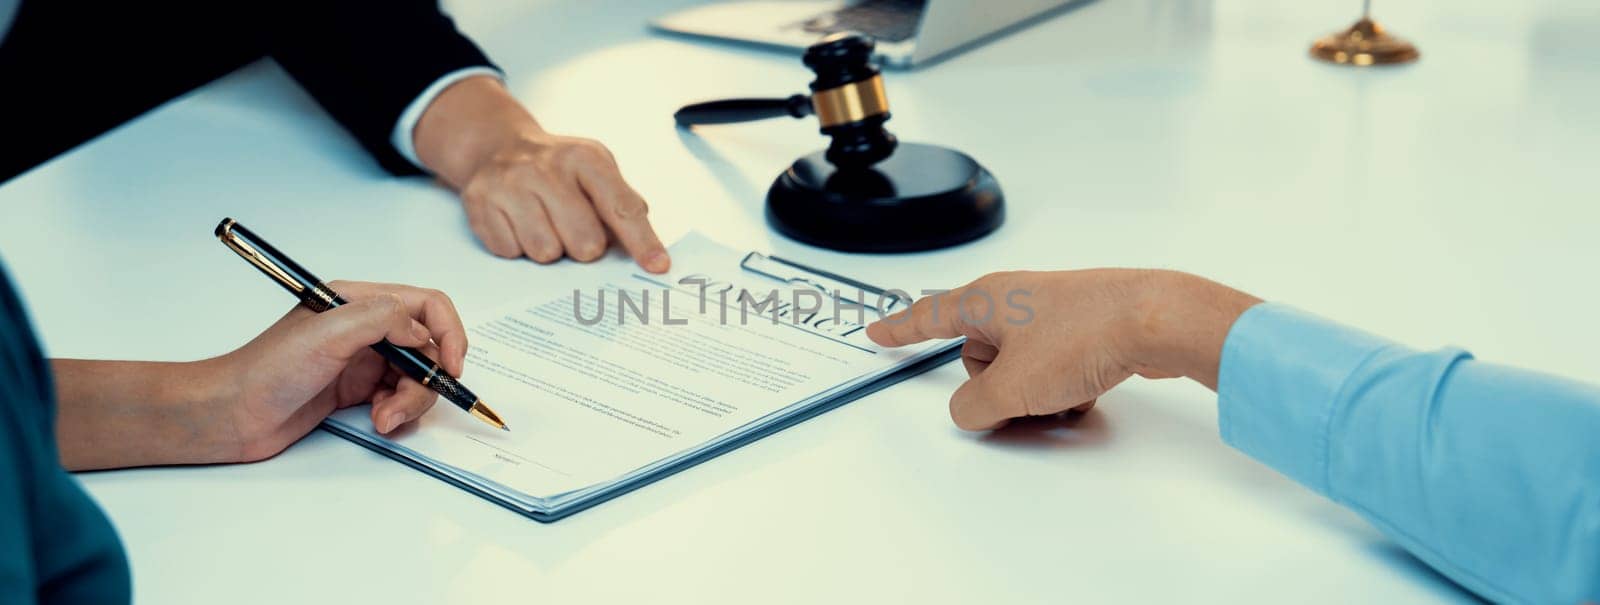 Couples file for divorcing and seek assistance from law firm to divide property after breakup. Obligations contract assist by lawyer in negotiating settlement agreement meeting. Panorama Rigid